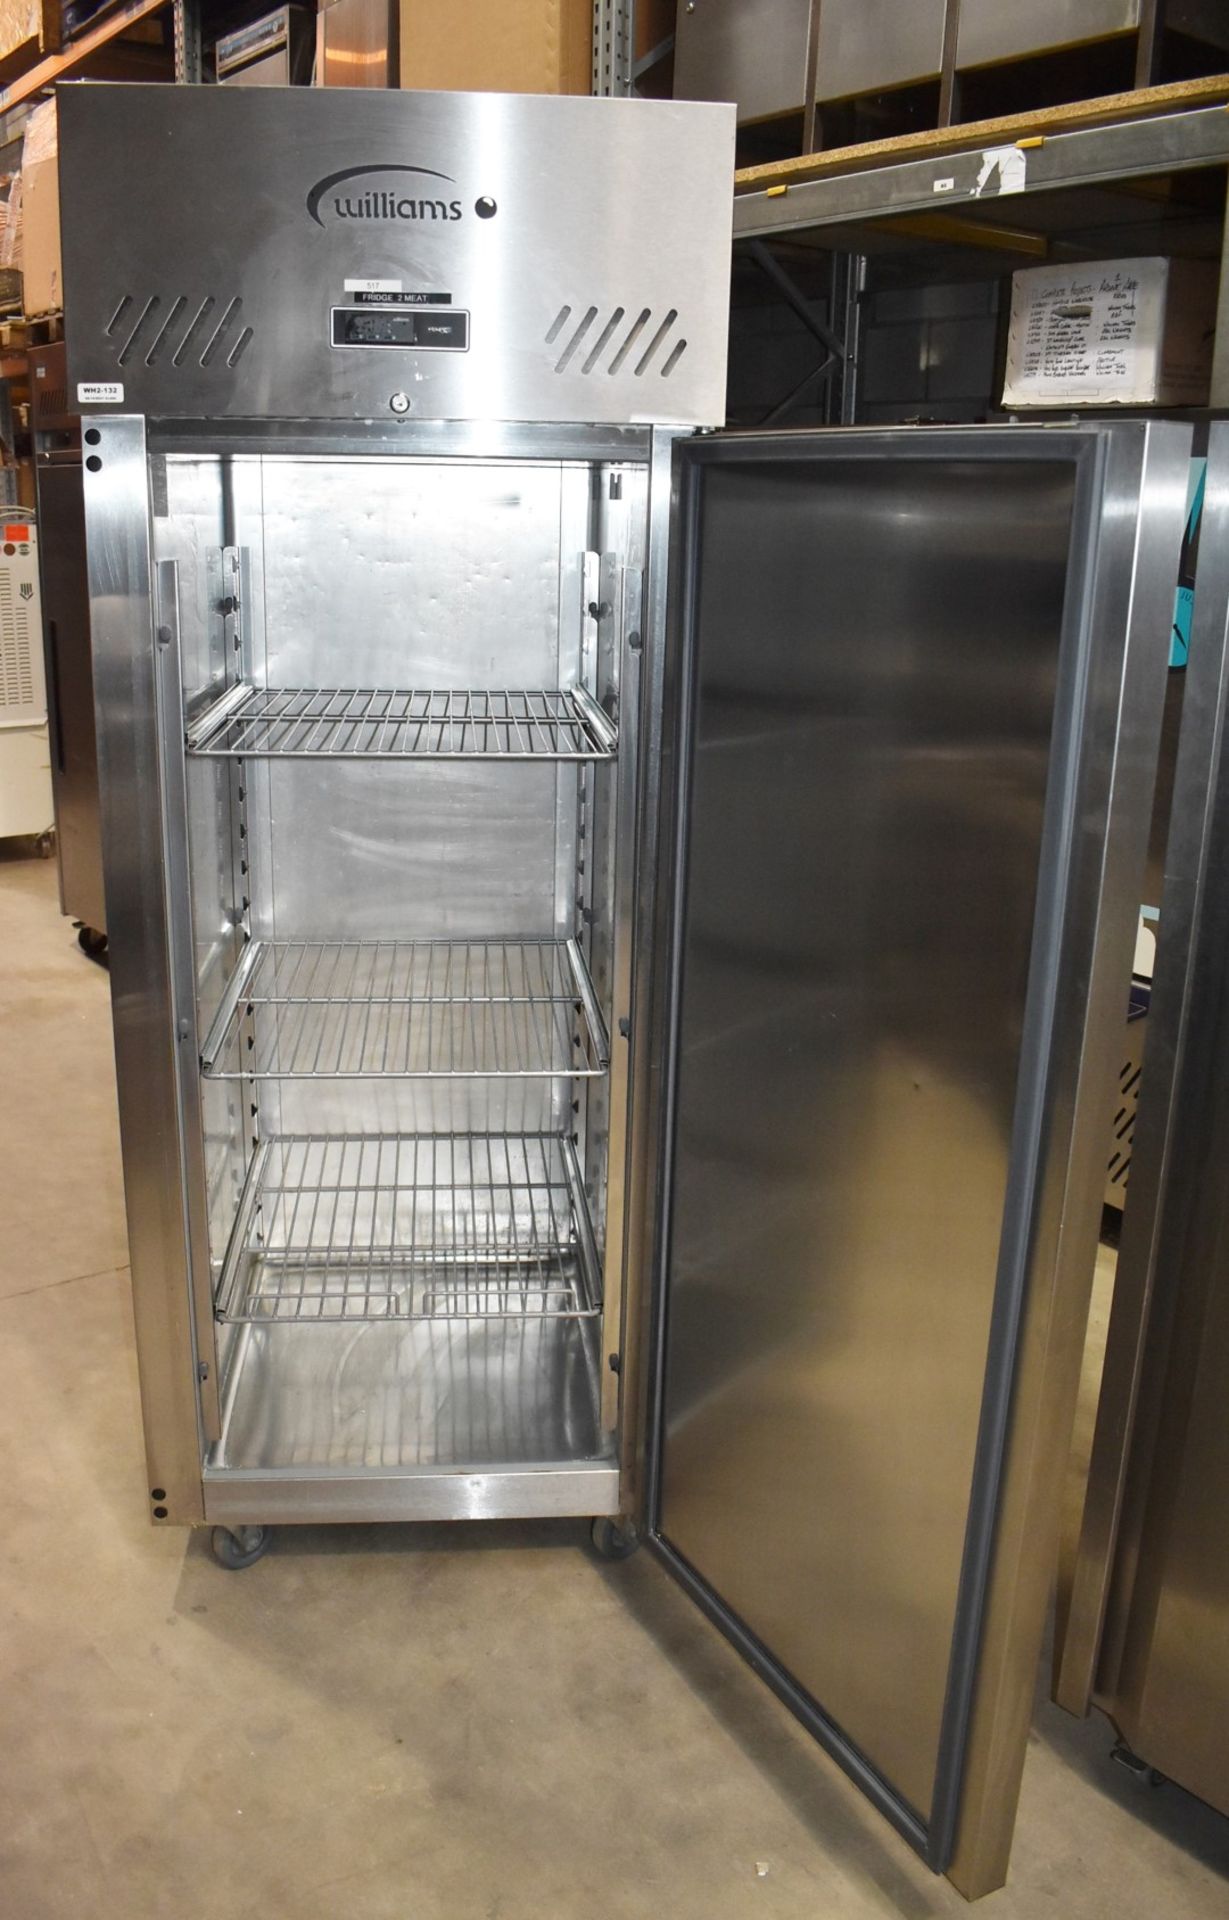 1 x Williams Upright Single Door Refrigerator With Stainless Steel Exterior - Model HS1SA - Recently - Image 6 of 12